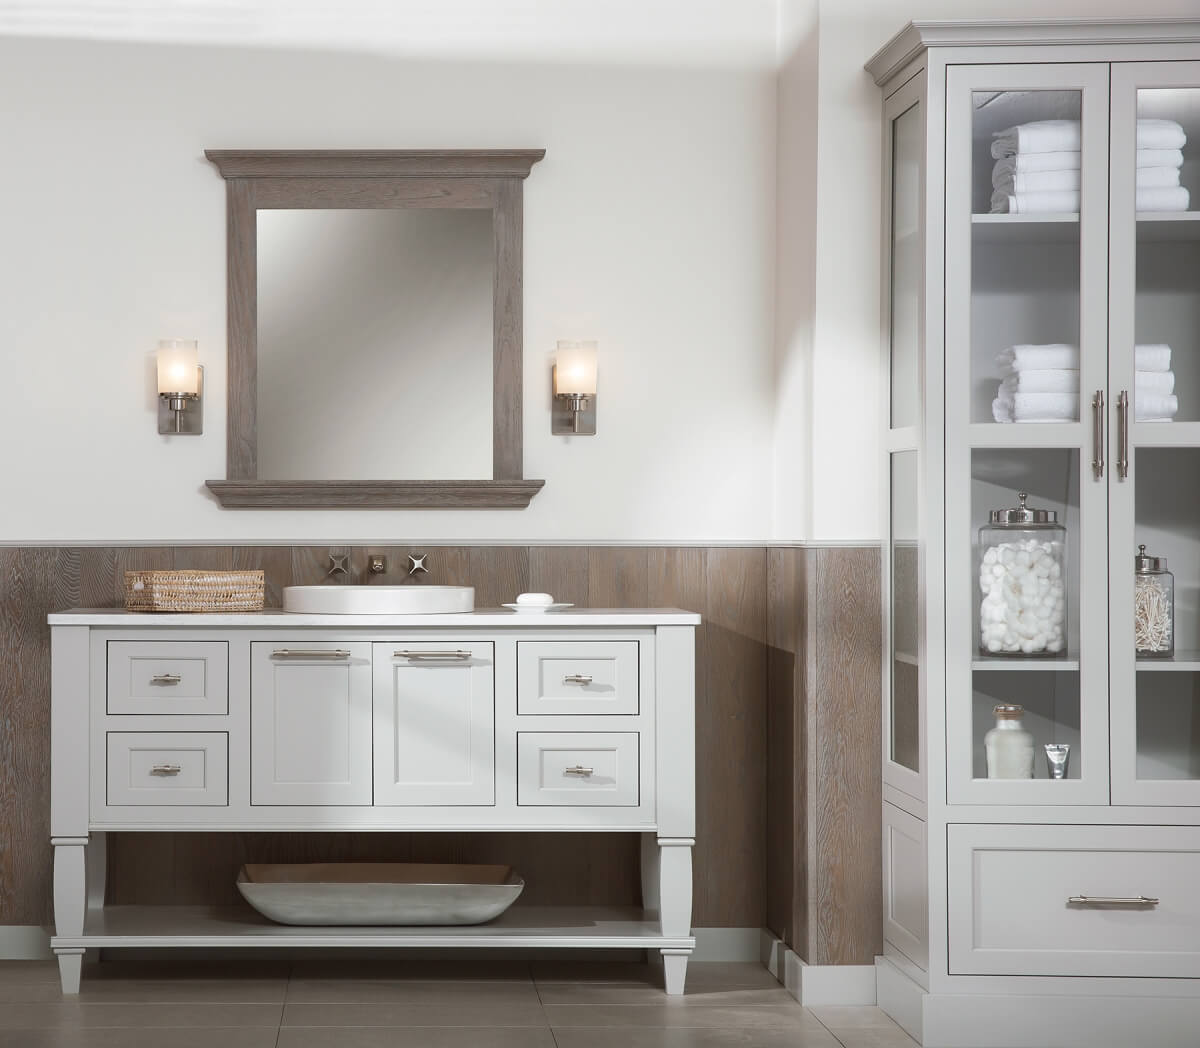 Transitional style bathroom featuring Dura Supreme Cabinetry's furniture vanity style five in the Kendall Panel (inset) door style with Sliver Mist paint finish. Mirror and paneling in a contrasting Weathered Finish 